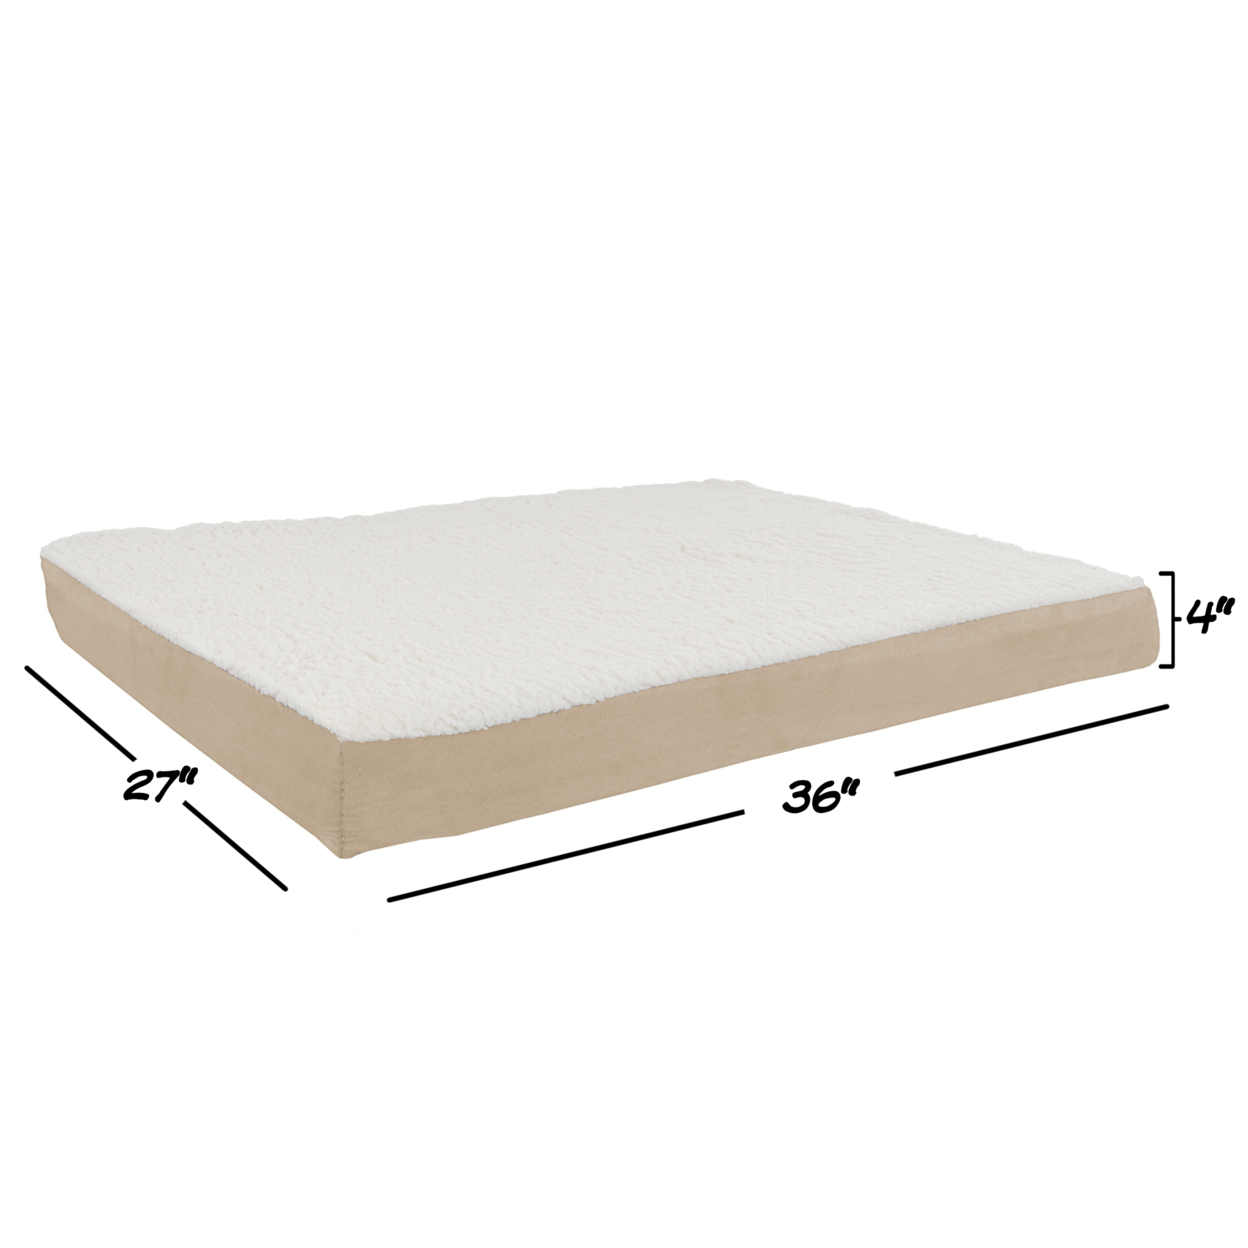 Orthopedic Sherpa Top Pet Bed With Memory Foam And Removable Cover 36 X 27 X 4 Tan Large